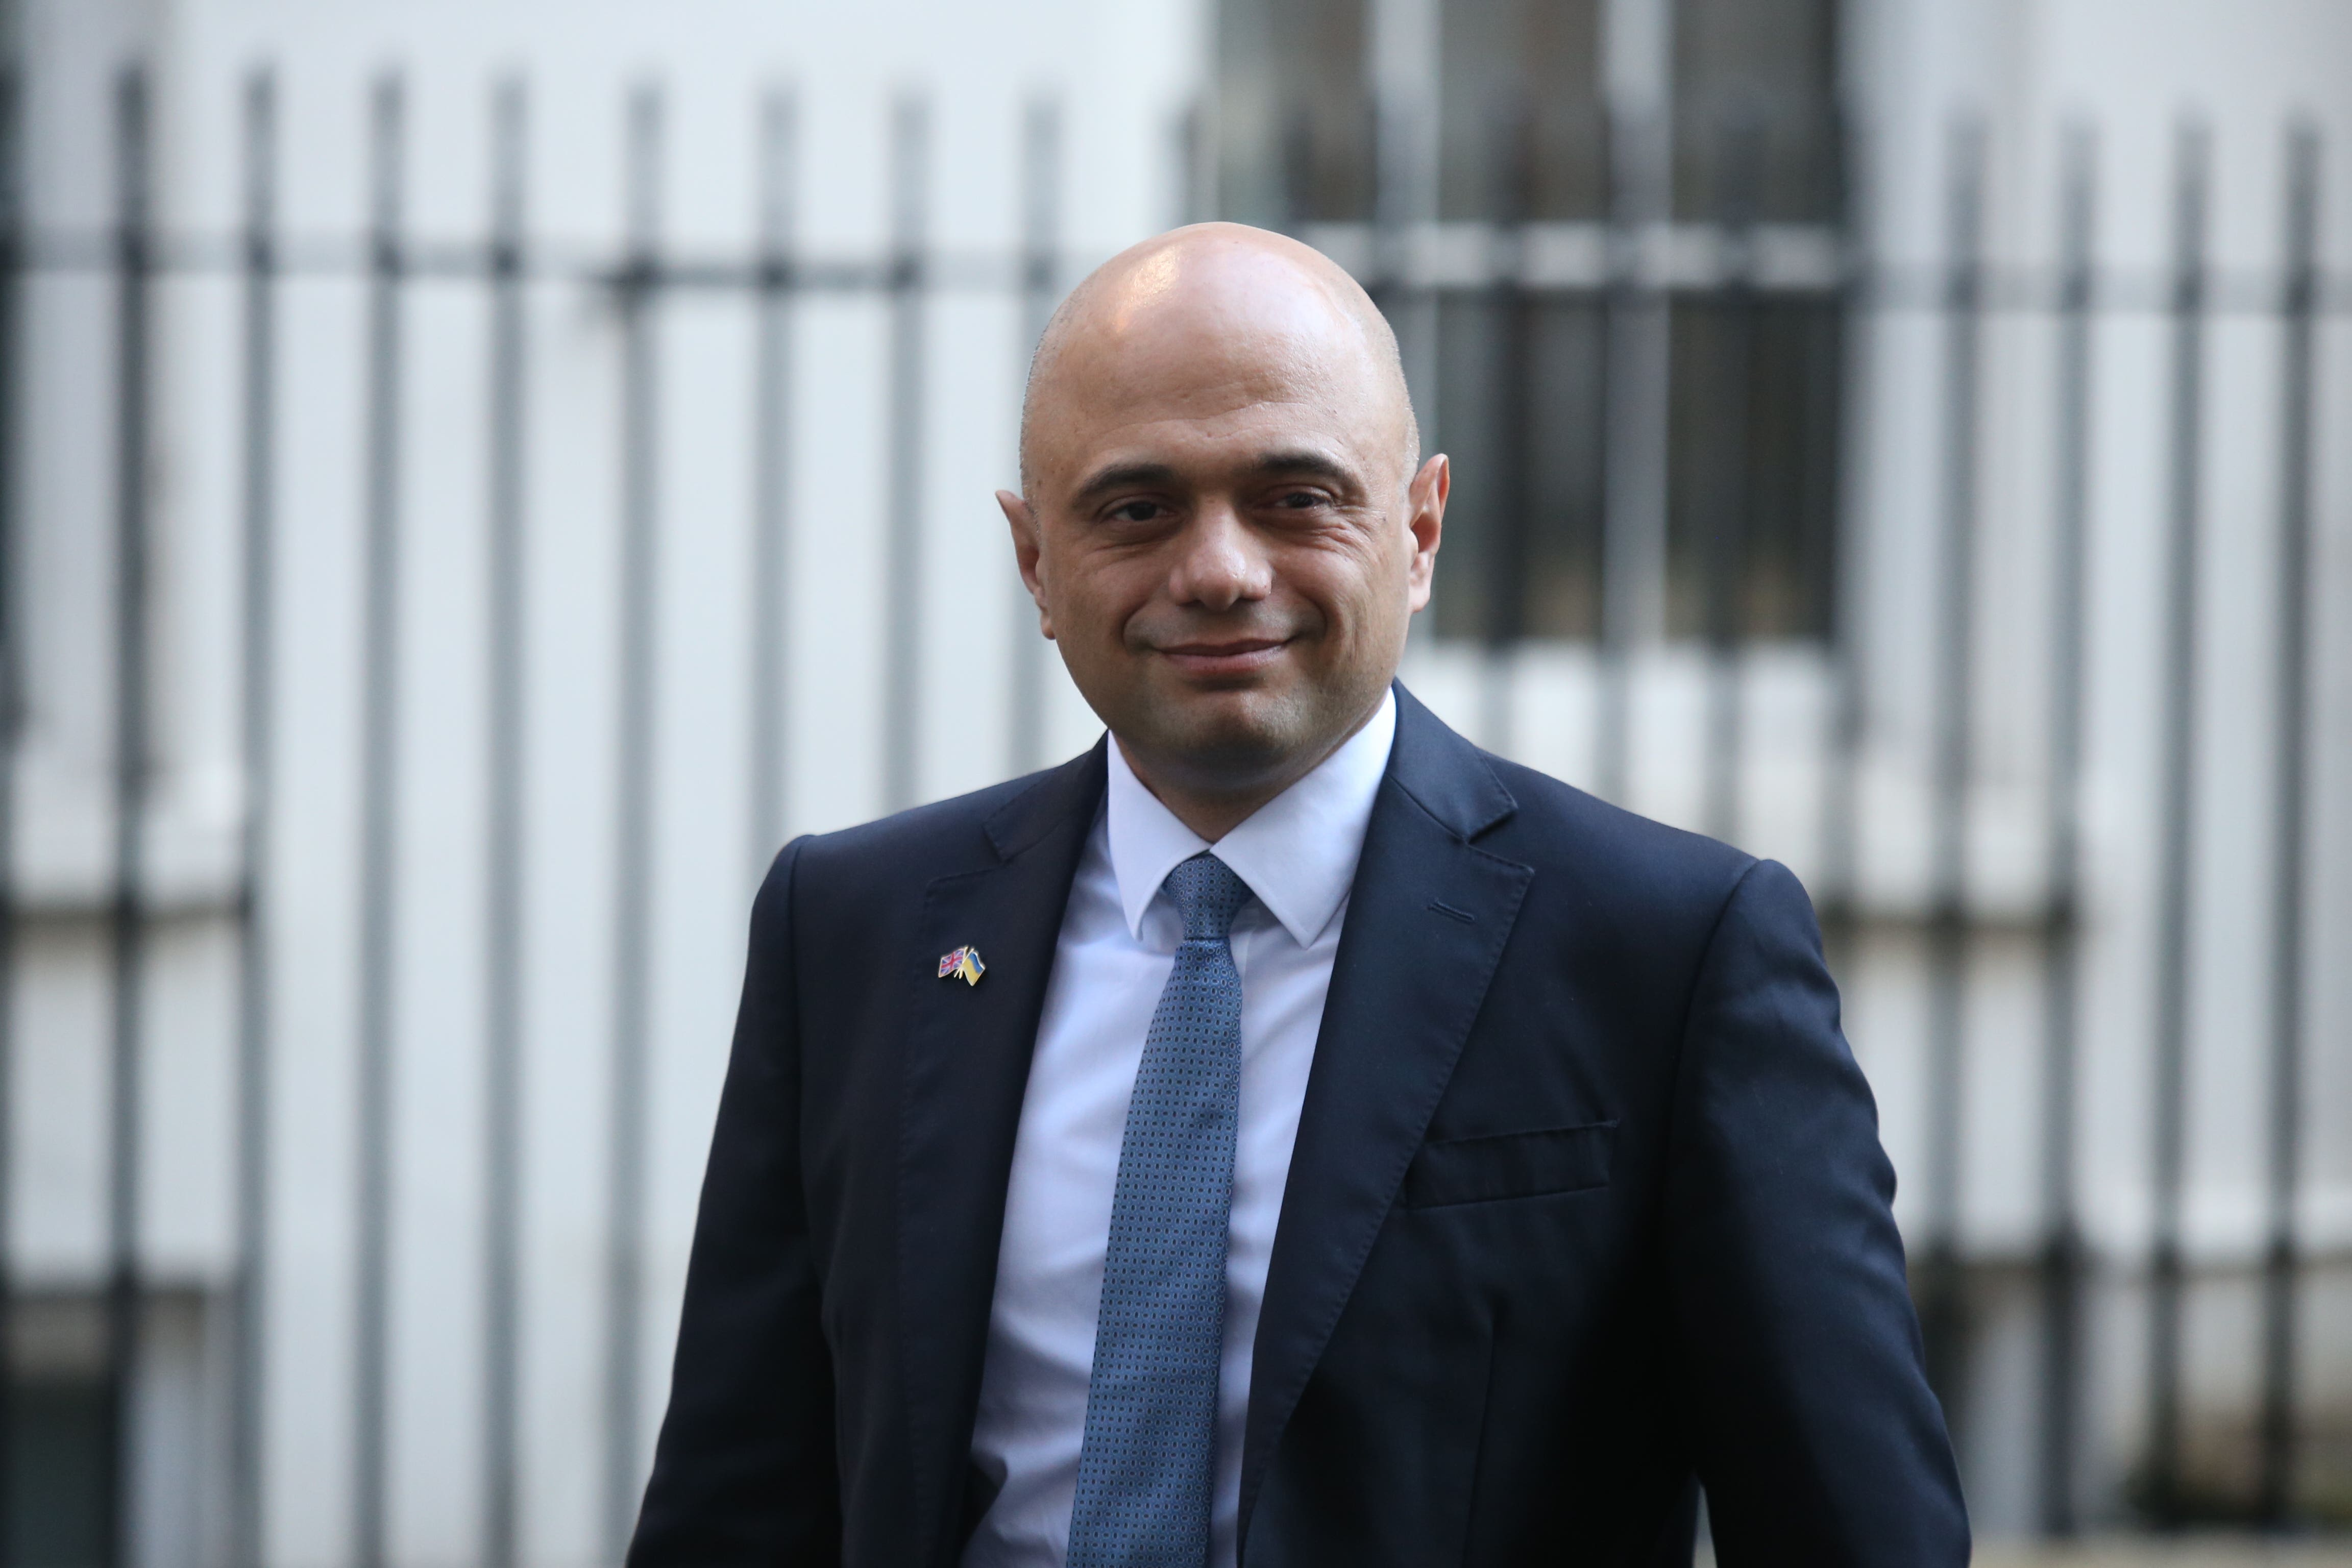 Sajid Javid says government has ‘problem with talent of some ministers’